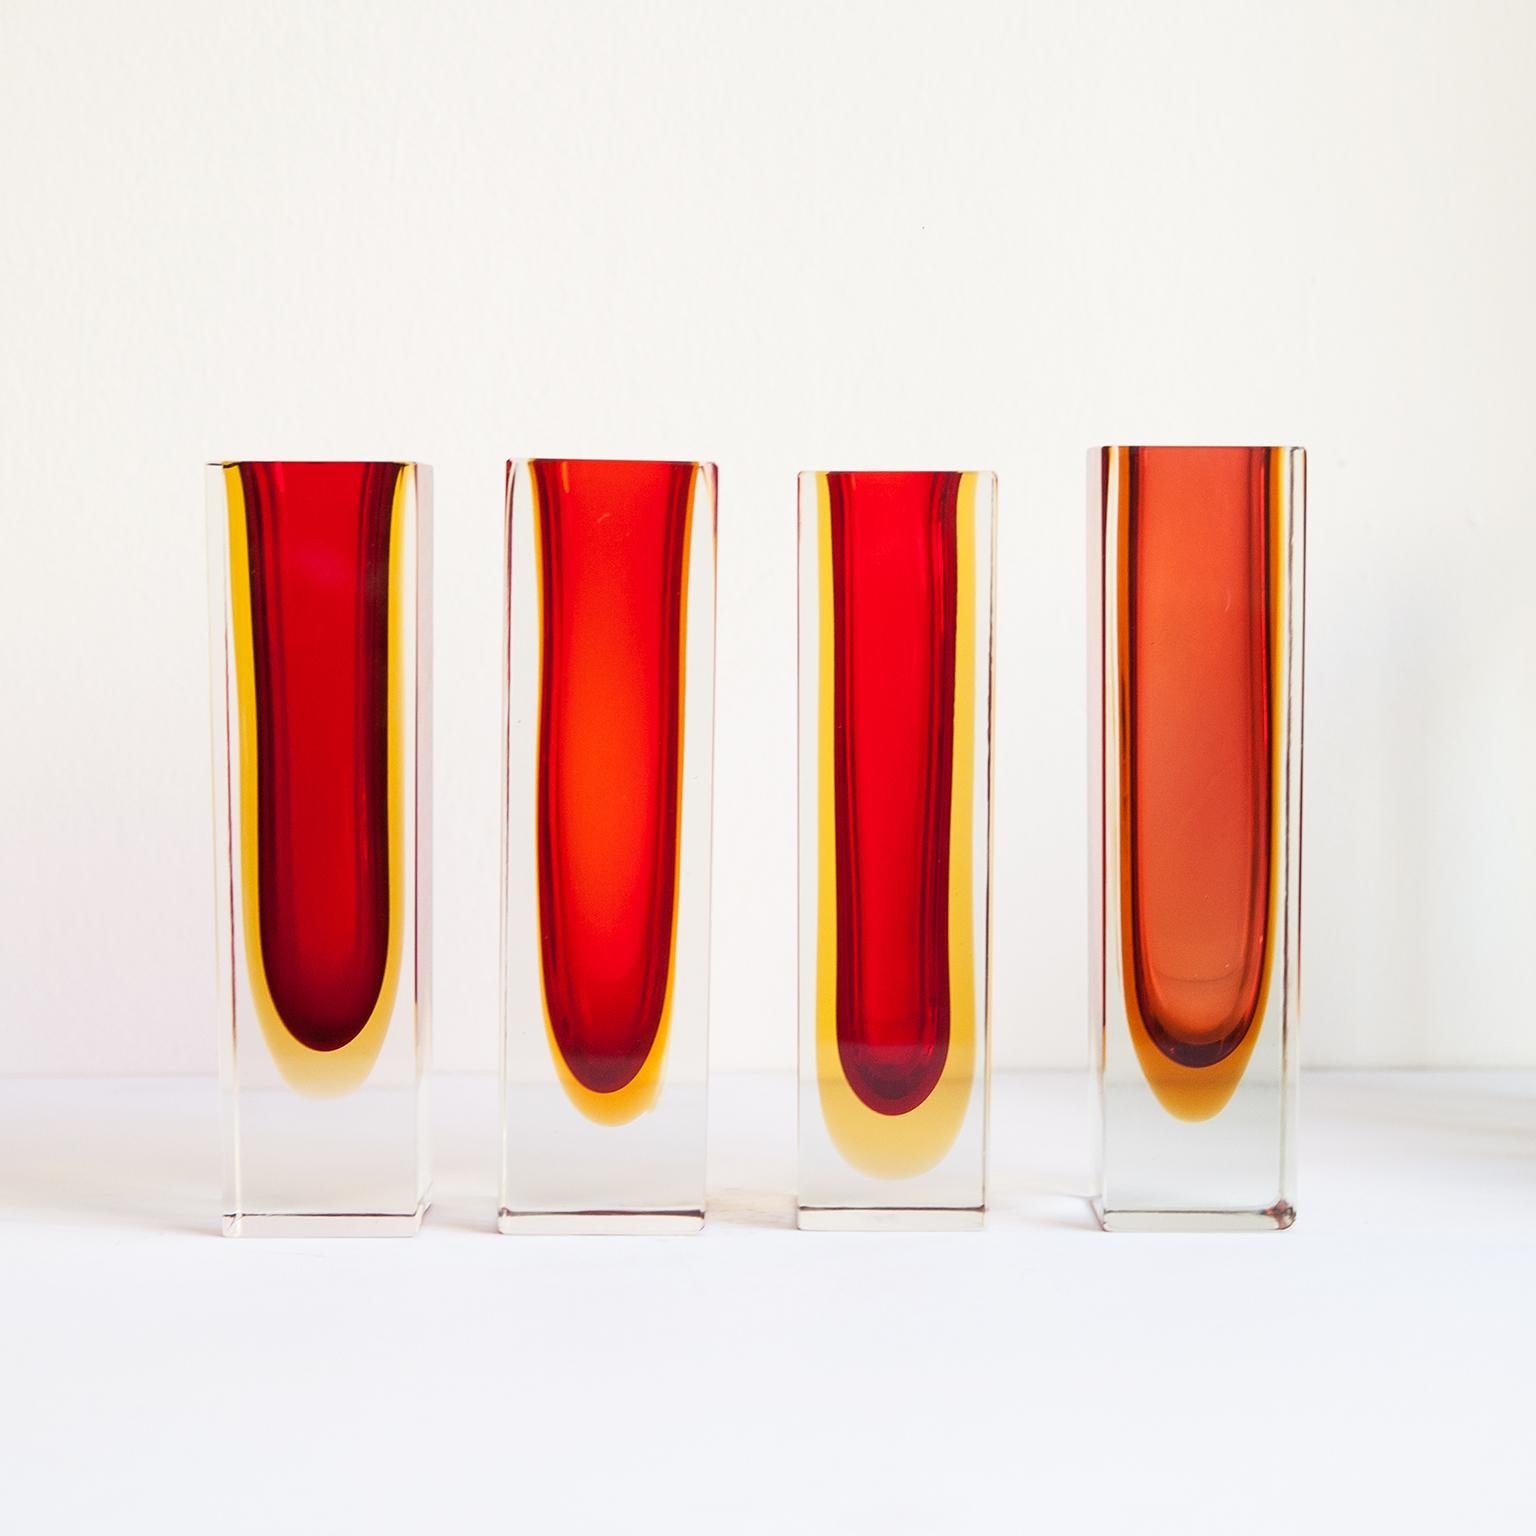 Wonderful set of Sommerso Murano Glass Vases made by Flavio Poli.
The heights are from 30-23 cm and the diameter from 7-5 cm.
Very good vintage condition, no chips or defects.